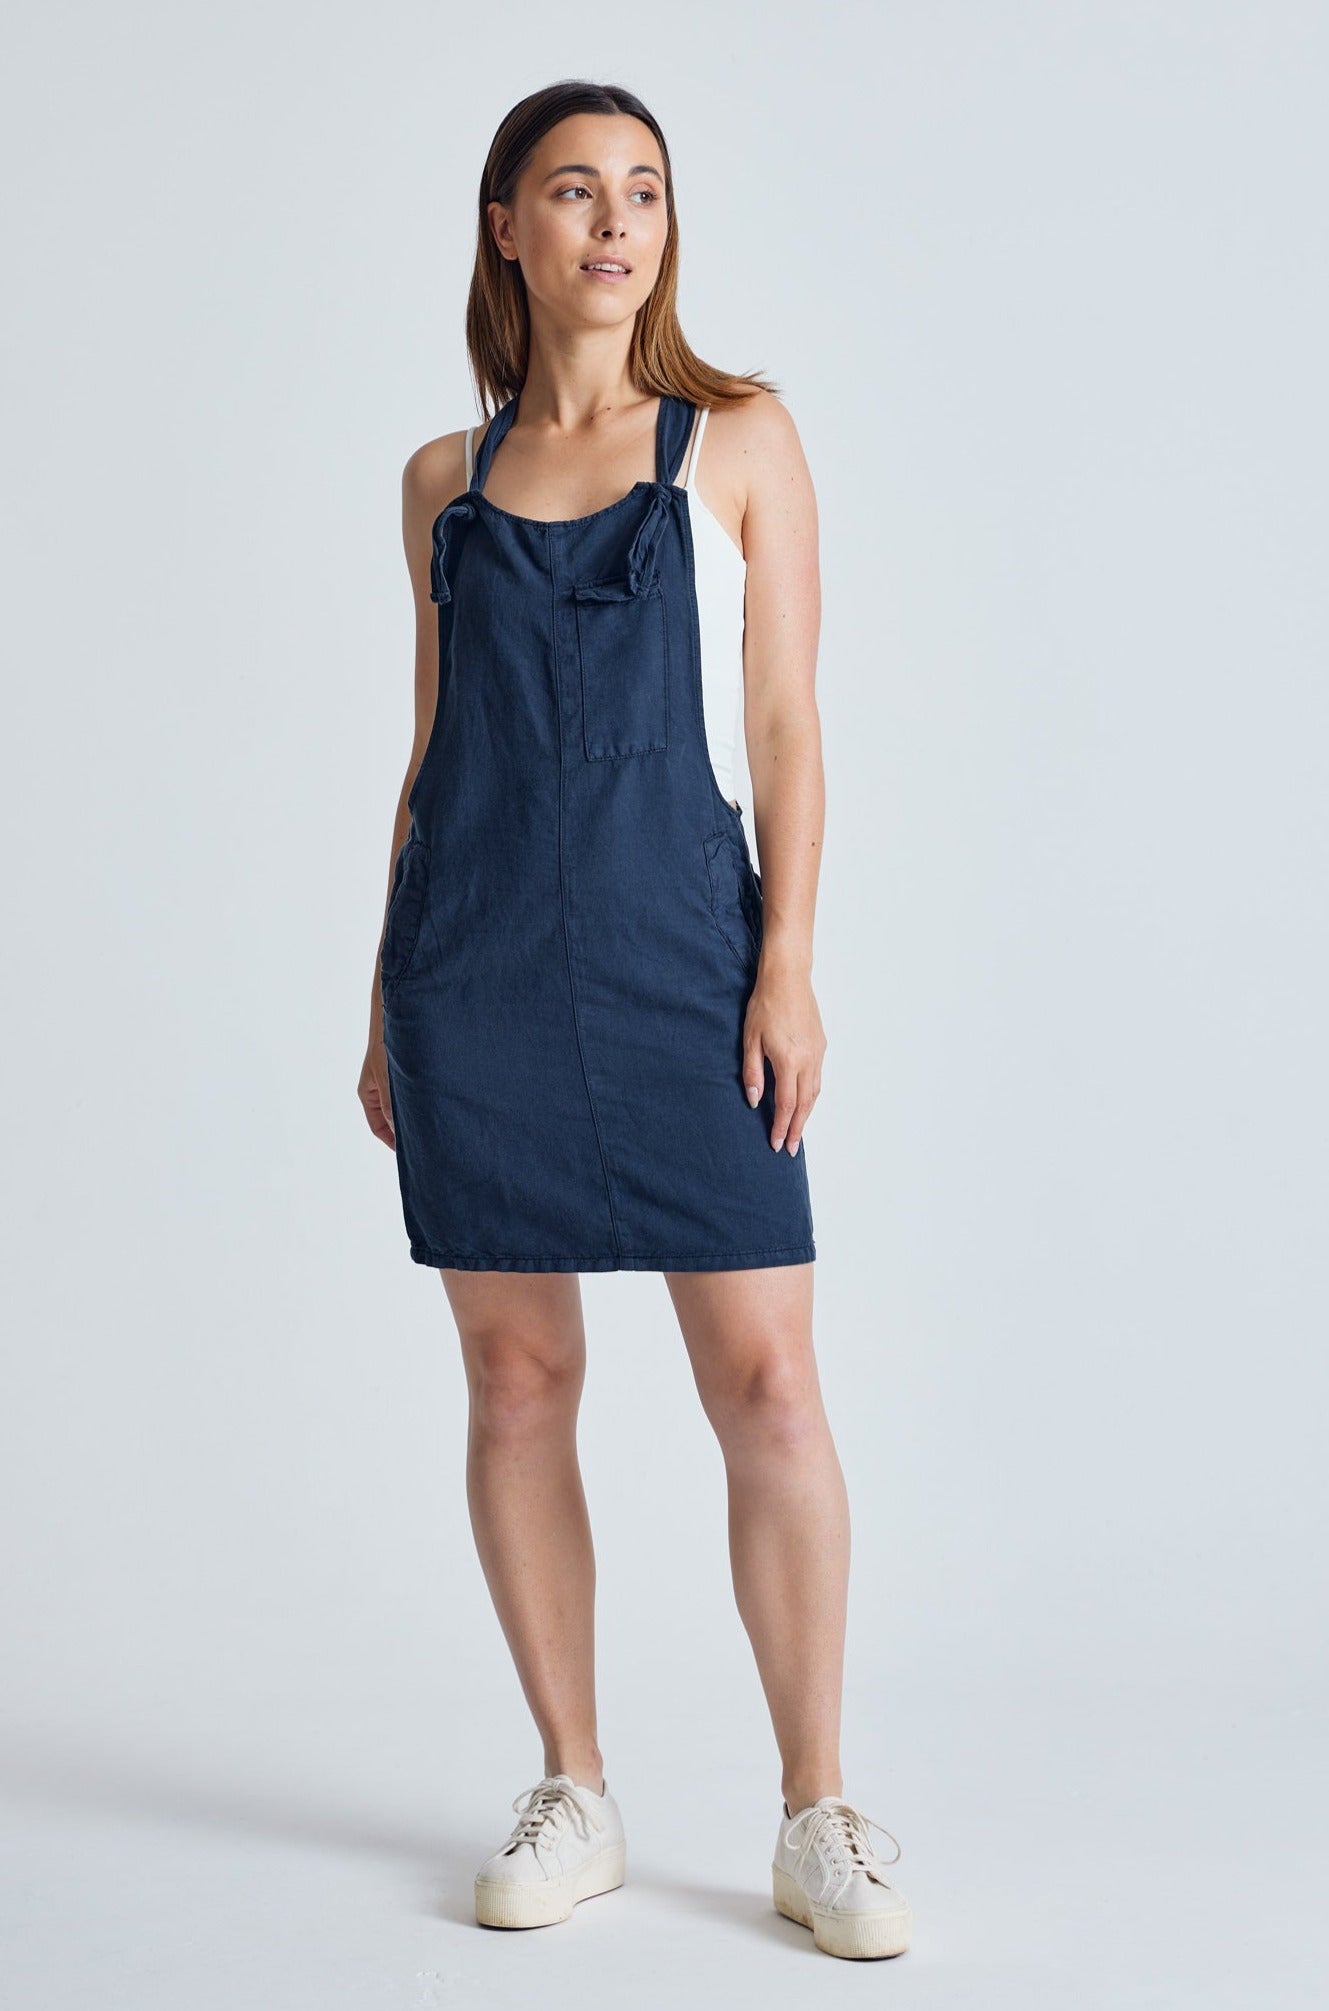 Navy Peggy Pocket Dungaree Dress - GOTS Certified Organic Cotton and Linen